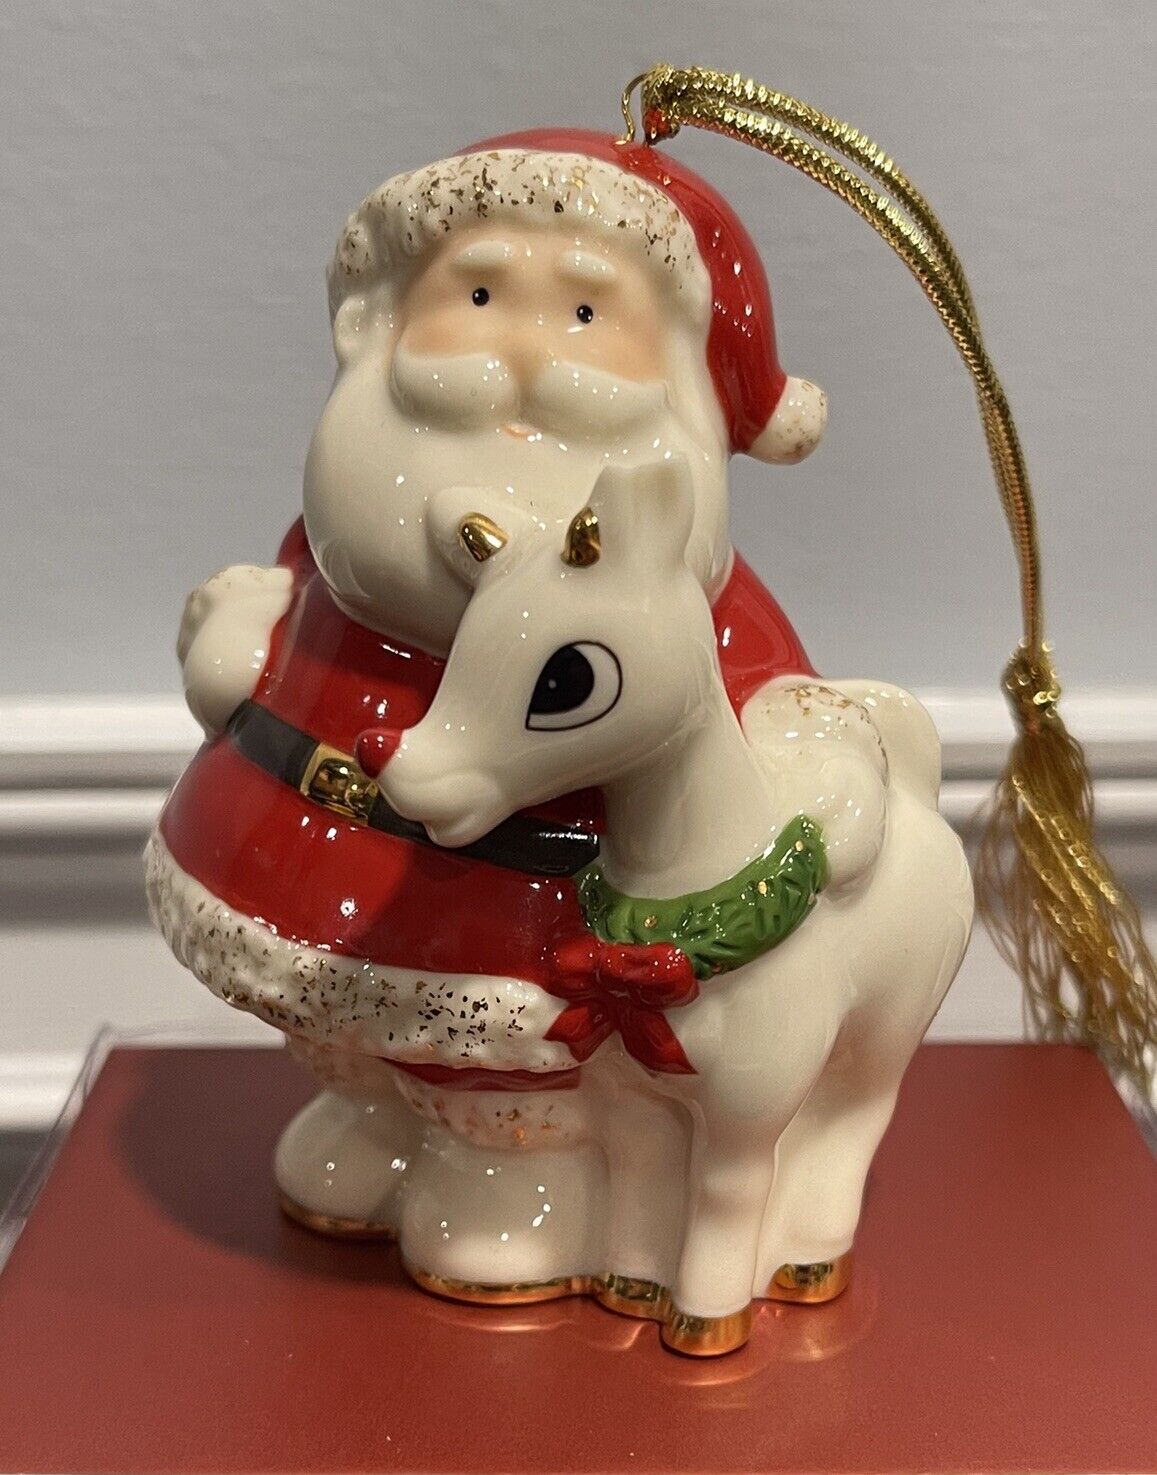 LENOX Rudolph with Santa Porcelain Christmas 2004 Annual Ornament Hand Crafted